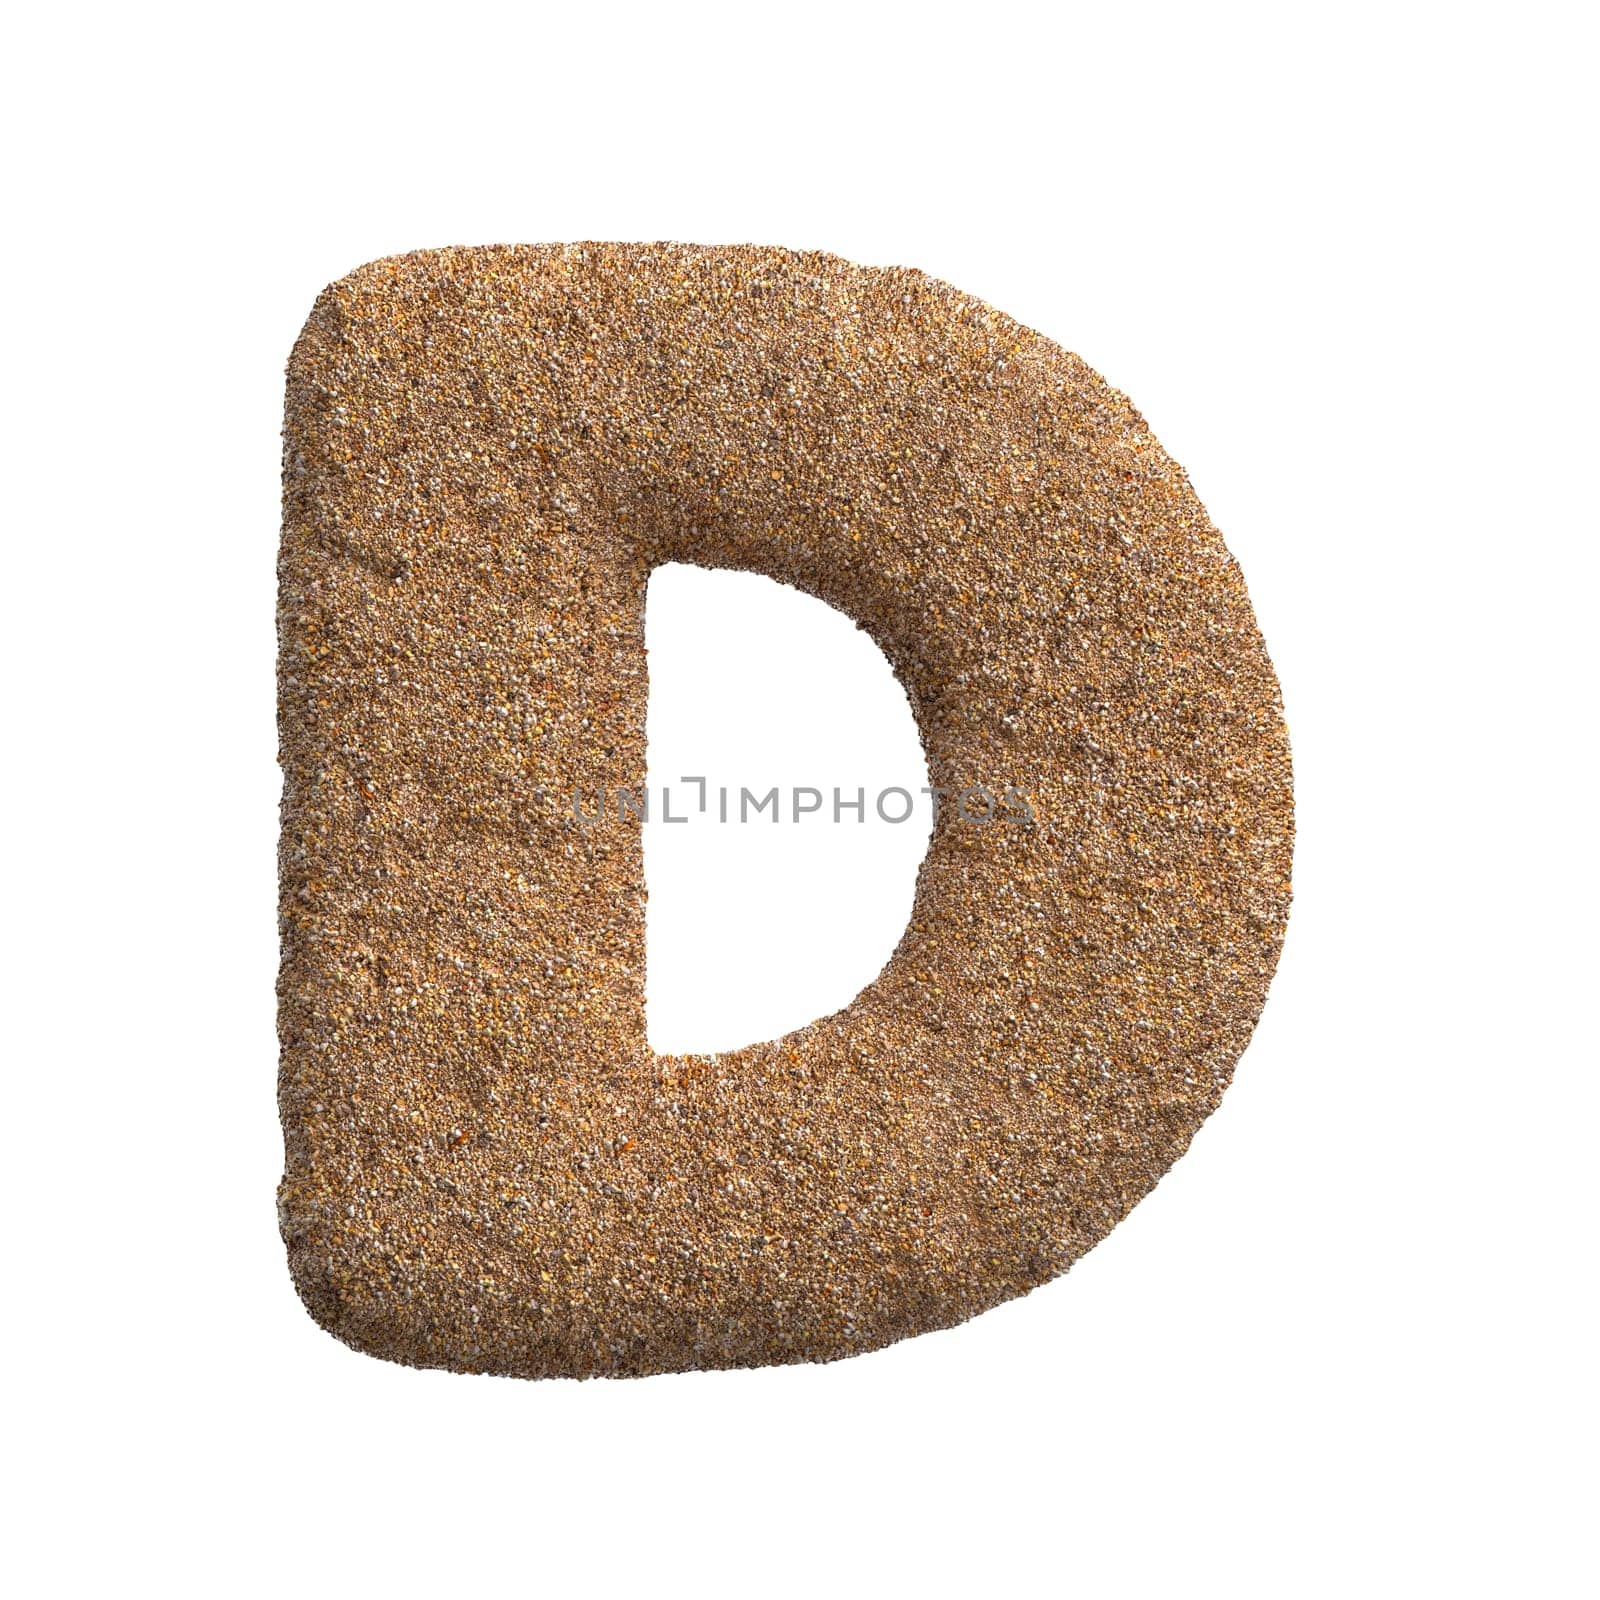 Sand letter D - Capital 3d beach font - Holidays, travel or ocean concepts by chrisroll